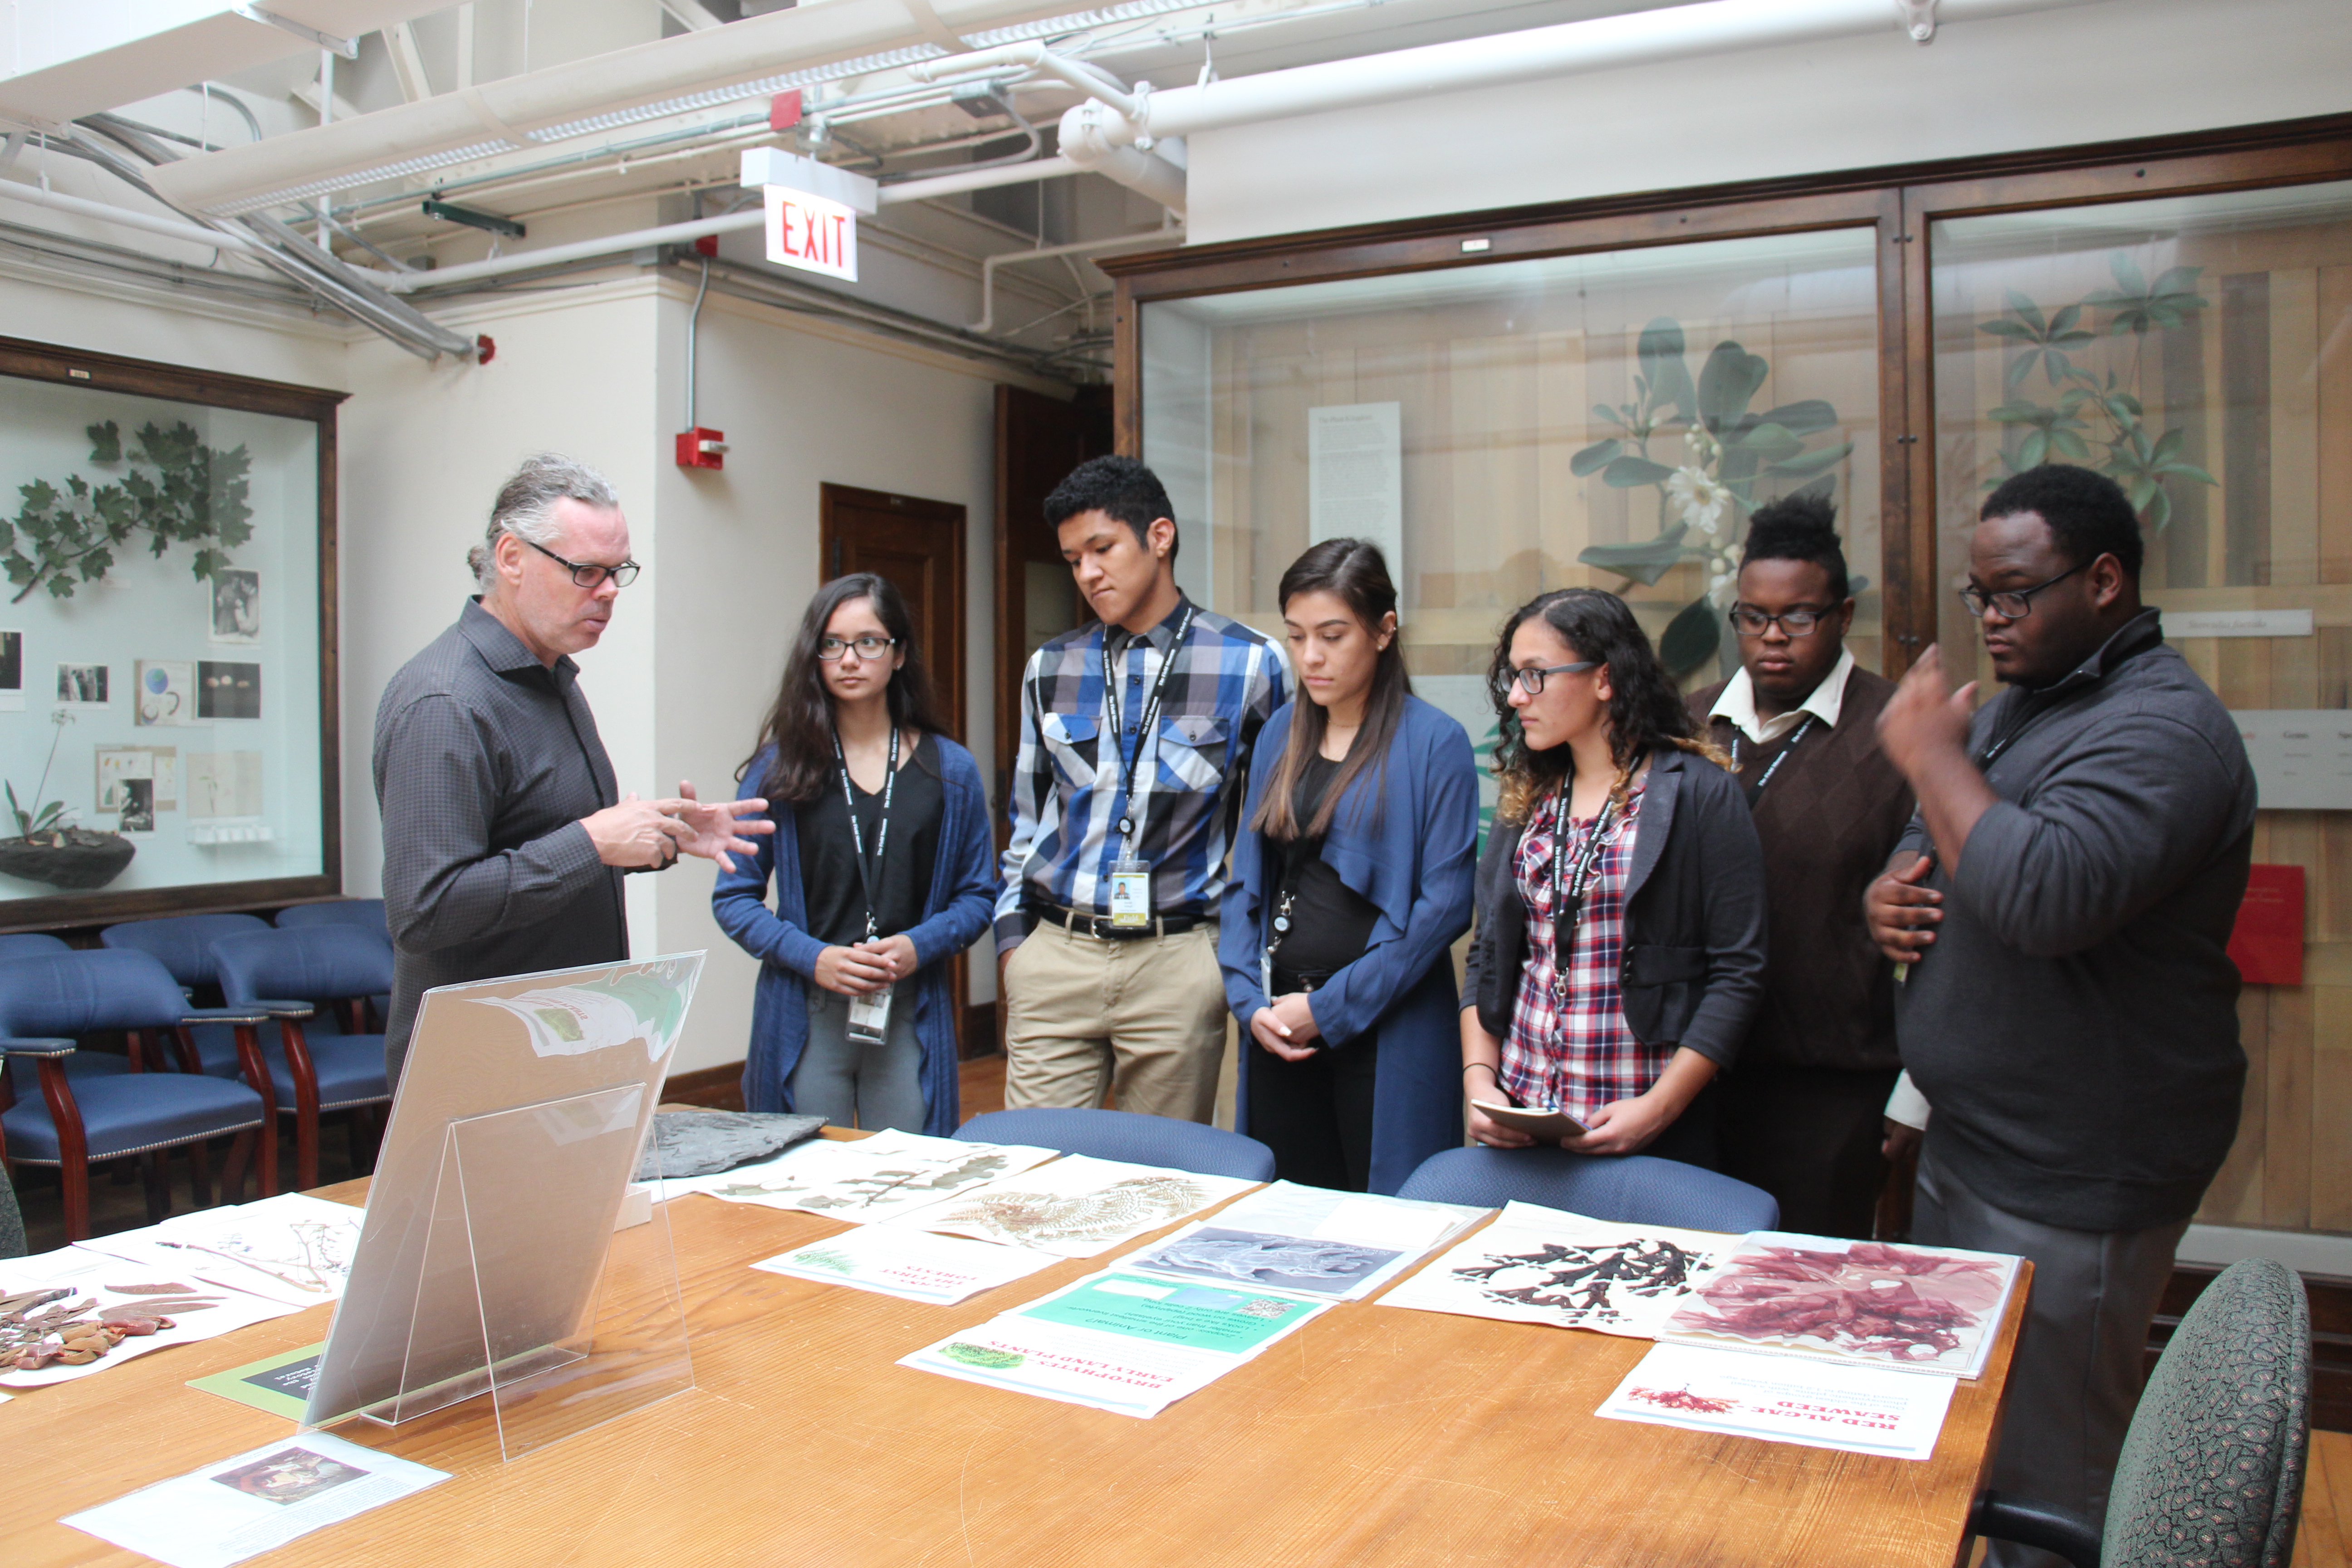 A scientist shares information about the botany collection at the Field Museum with a group of students in a classroom. Images of various plant specimens are laid out on a table as the scientist holds his hands out and lectures. Several cases of wax plant models visible in the background.